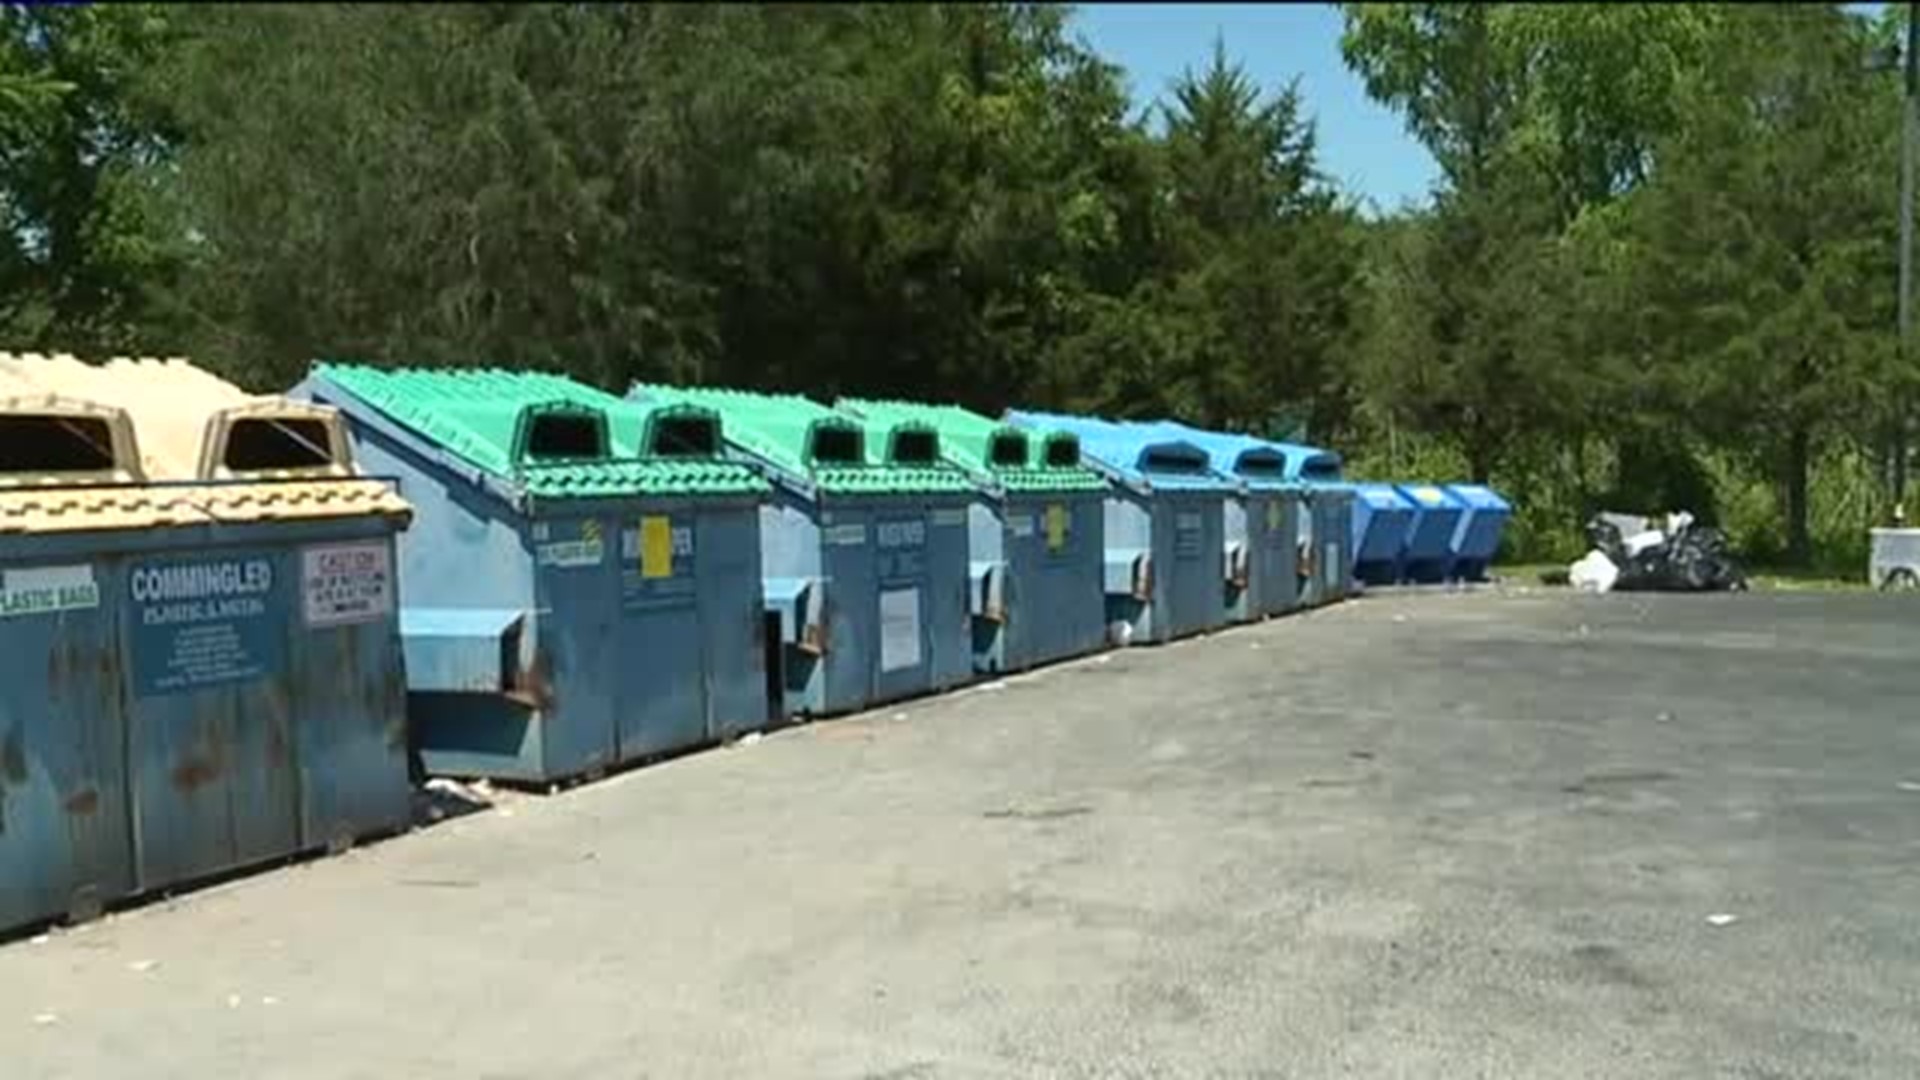 Illegal Dumping Shutting Down Recycling Site in Monroe County